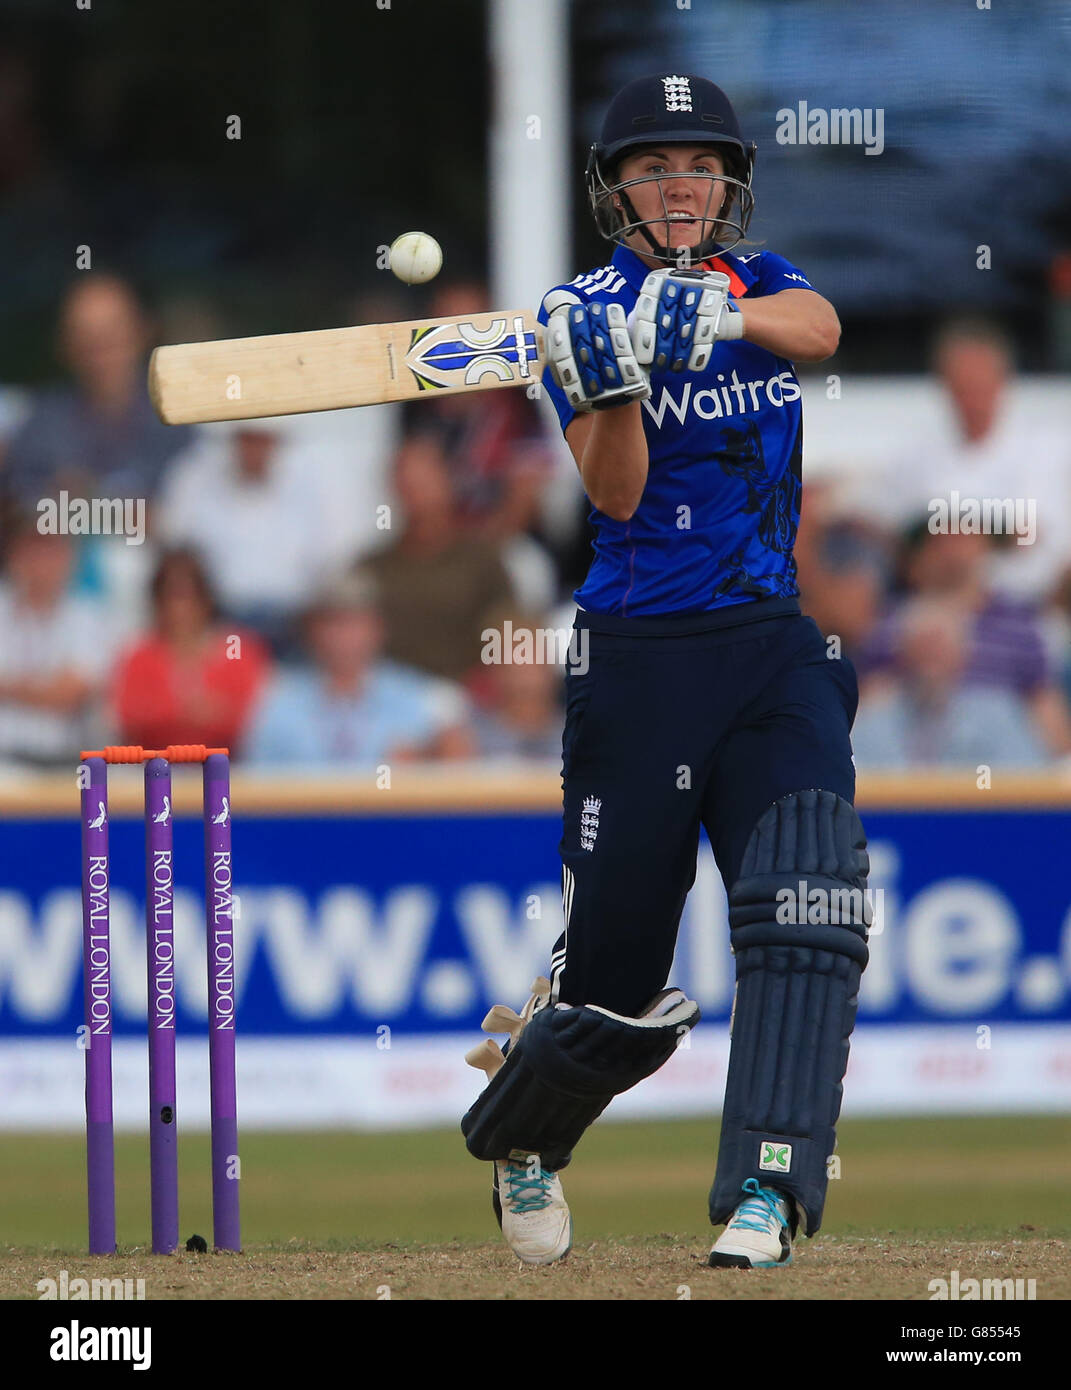 England batter Natalie Sciver hits a full toss off Australia bowler Erin Osborne, during the first One Day International of the women's Ashes at The County Ground, Taunton. Picture date: Tuesday July 21, 2015. See PA story CRICKET England Women. Photo credit should read: Nick Potts/PA Wire. RESTRICTIONS: No commercial use without prior written consent of the ECB. Still image use only no moving images to emulate broadcast. No removing or obscuring of sponsor logos. Call +44 (0)1158 447447 for further information Editorial Stock Photo